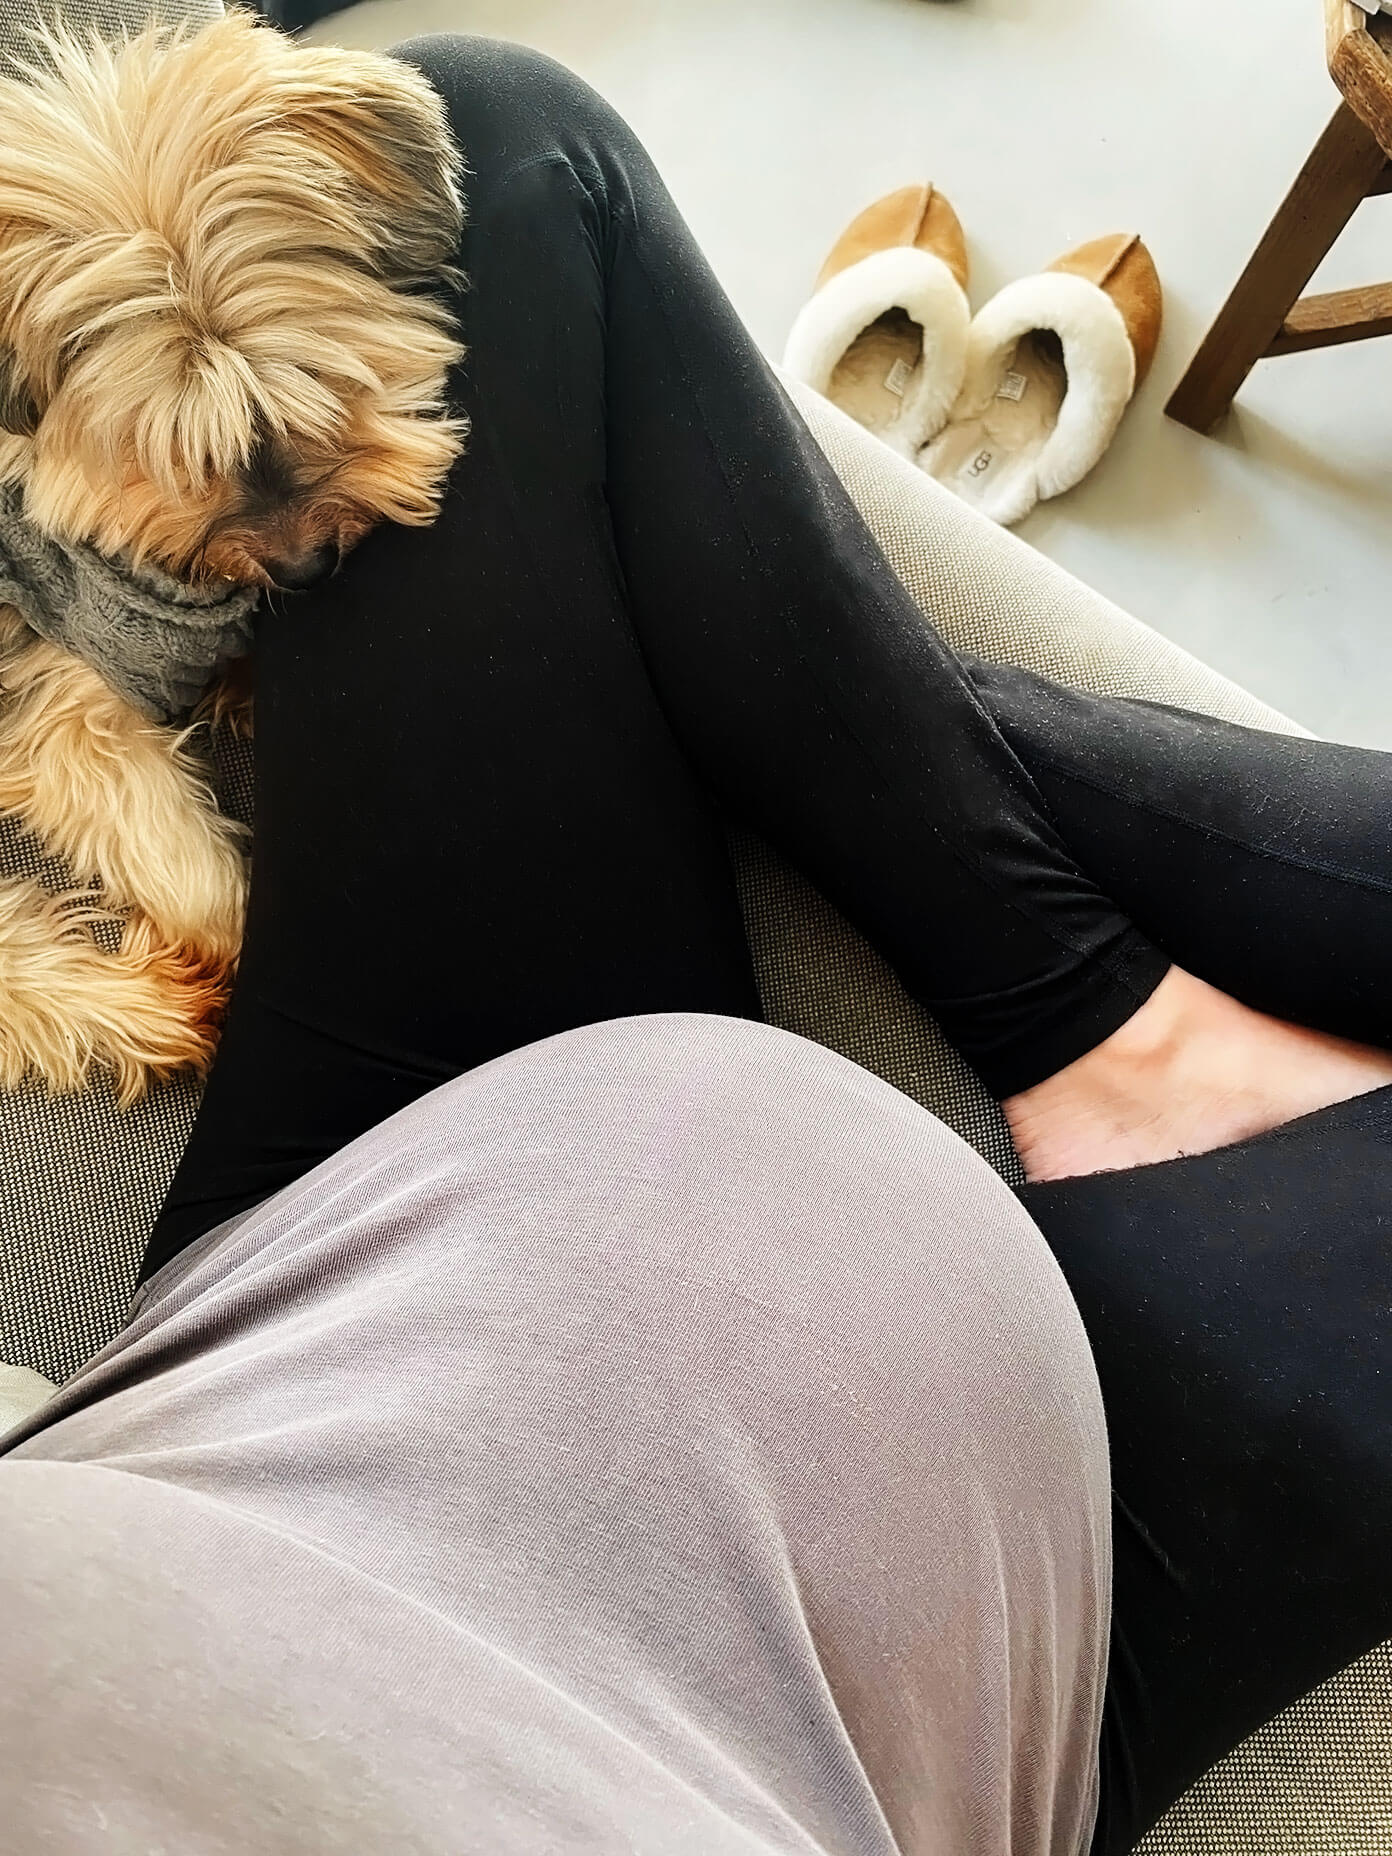 Baby bump and dog snuggles